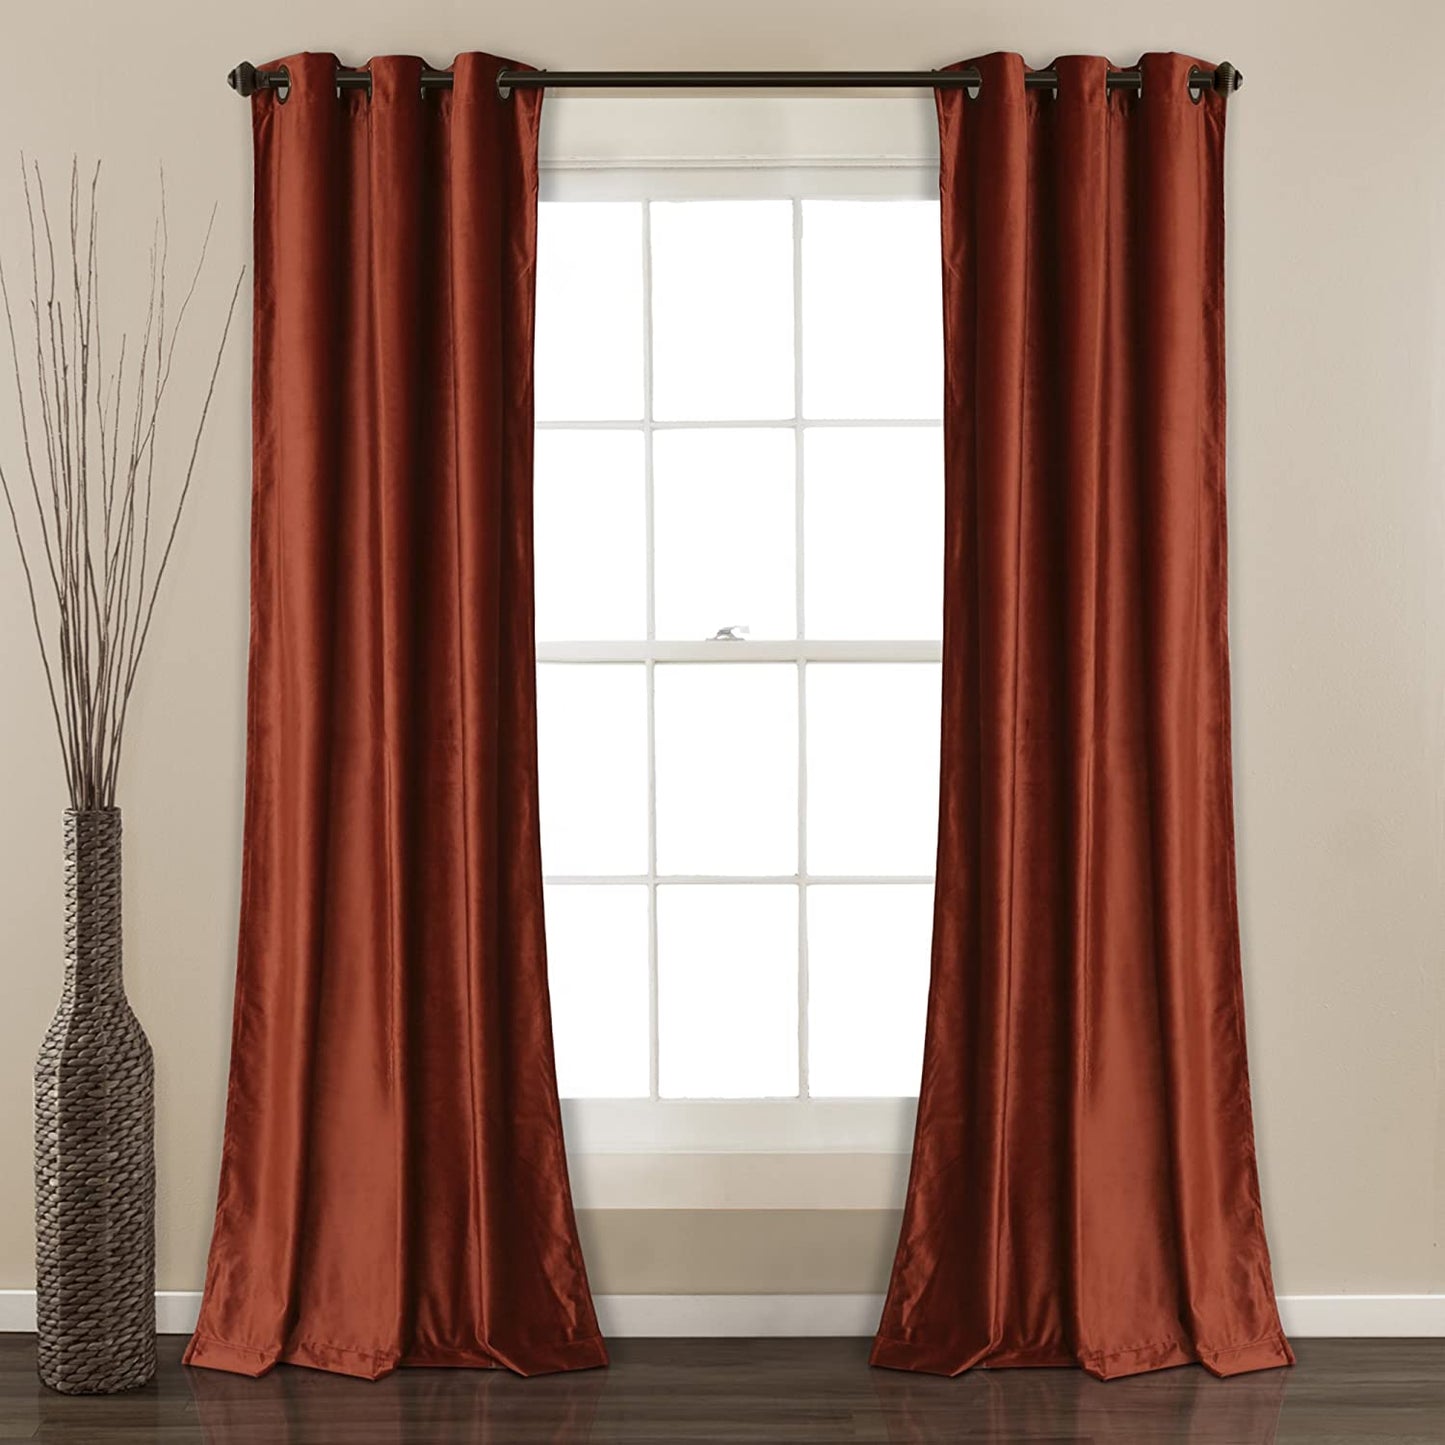 Lush Decor Prima Velvet Curtains Color Block Light Filtering Window Panel Set for Living, Dining, Bedroom (Pair), 38" W X 84" L, Navy  Triangle Home Fashions Rust Room Darkening 38"W X 108"L